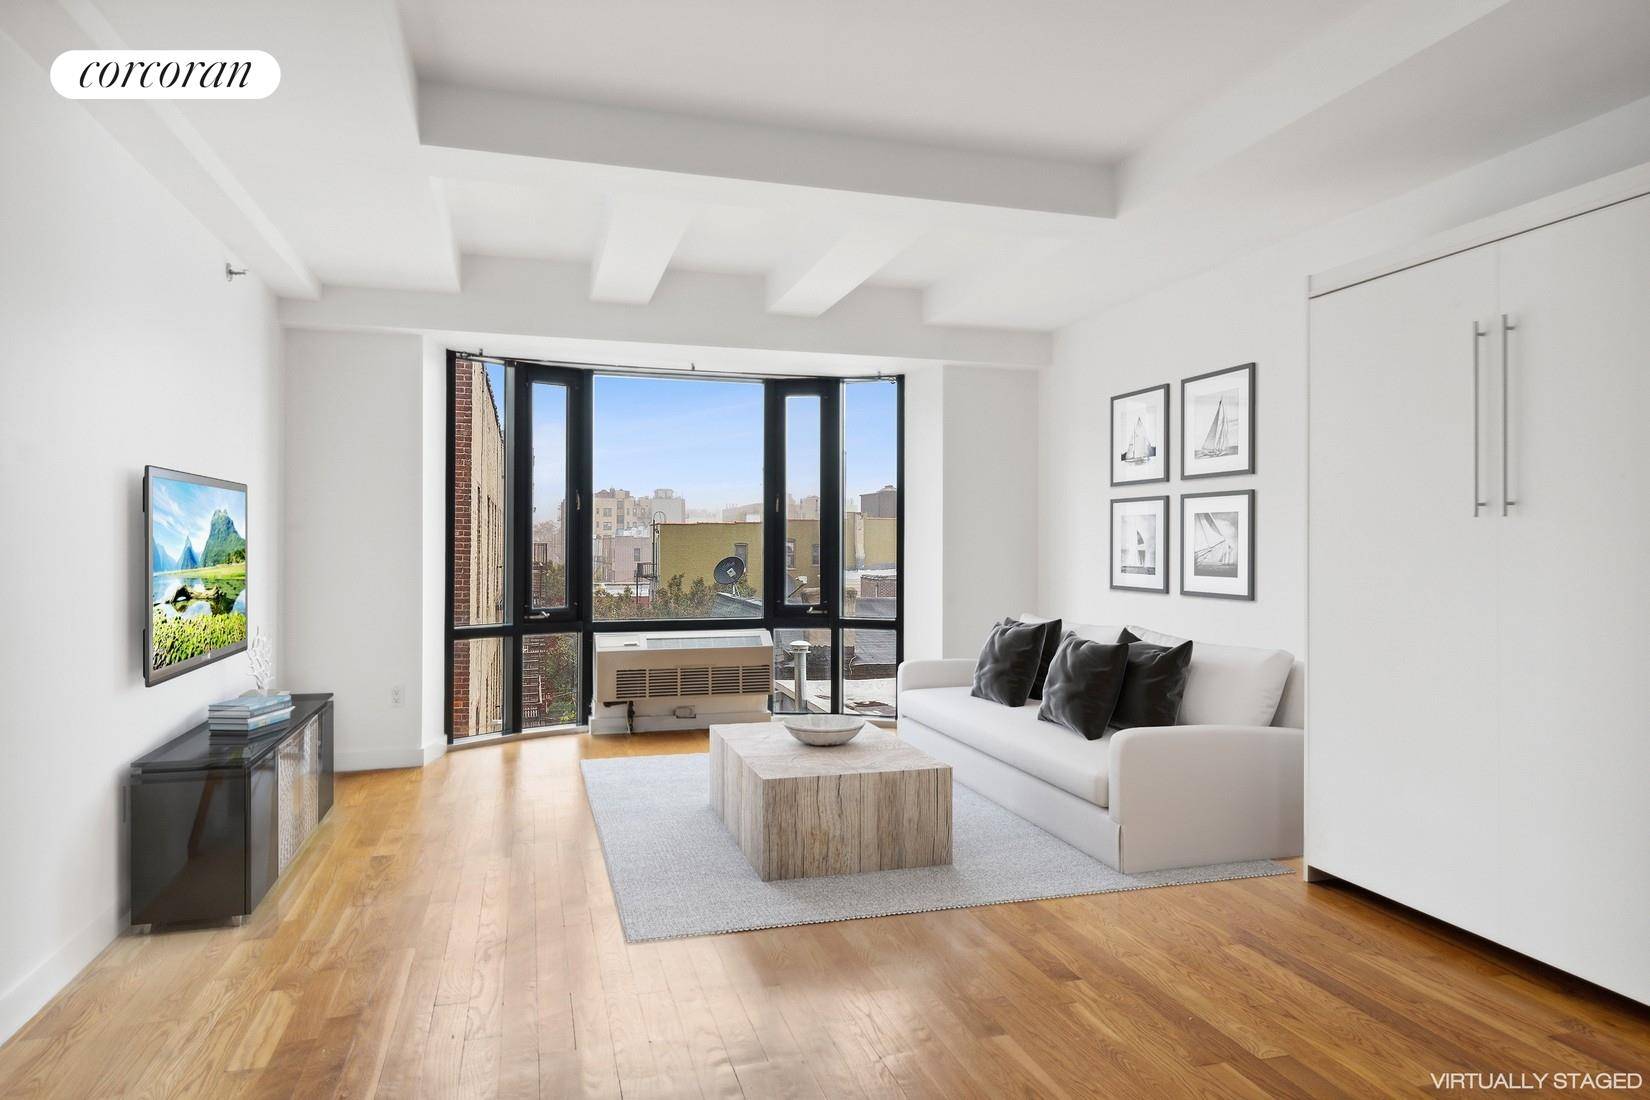 PRICED TO SELL Welcome to this bright, spacious studio 4D at the Santorini Condominium, ideally located in the heart of Astoria, only 3 subway stops from Manhattan.